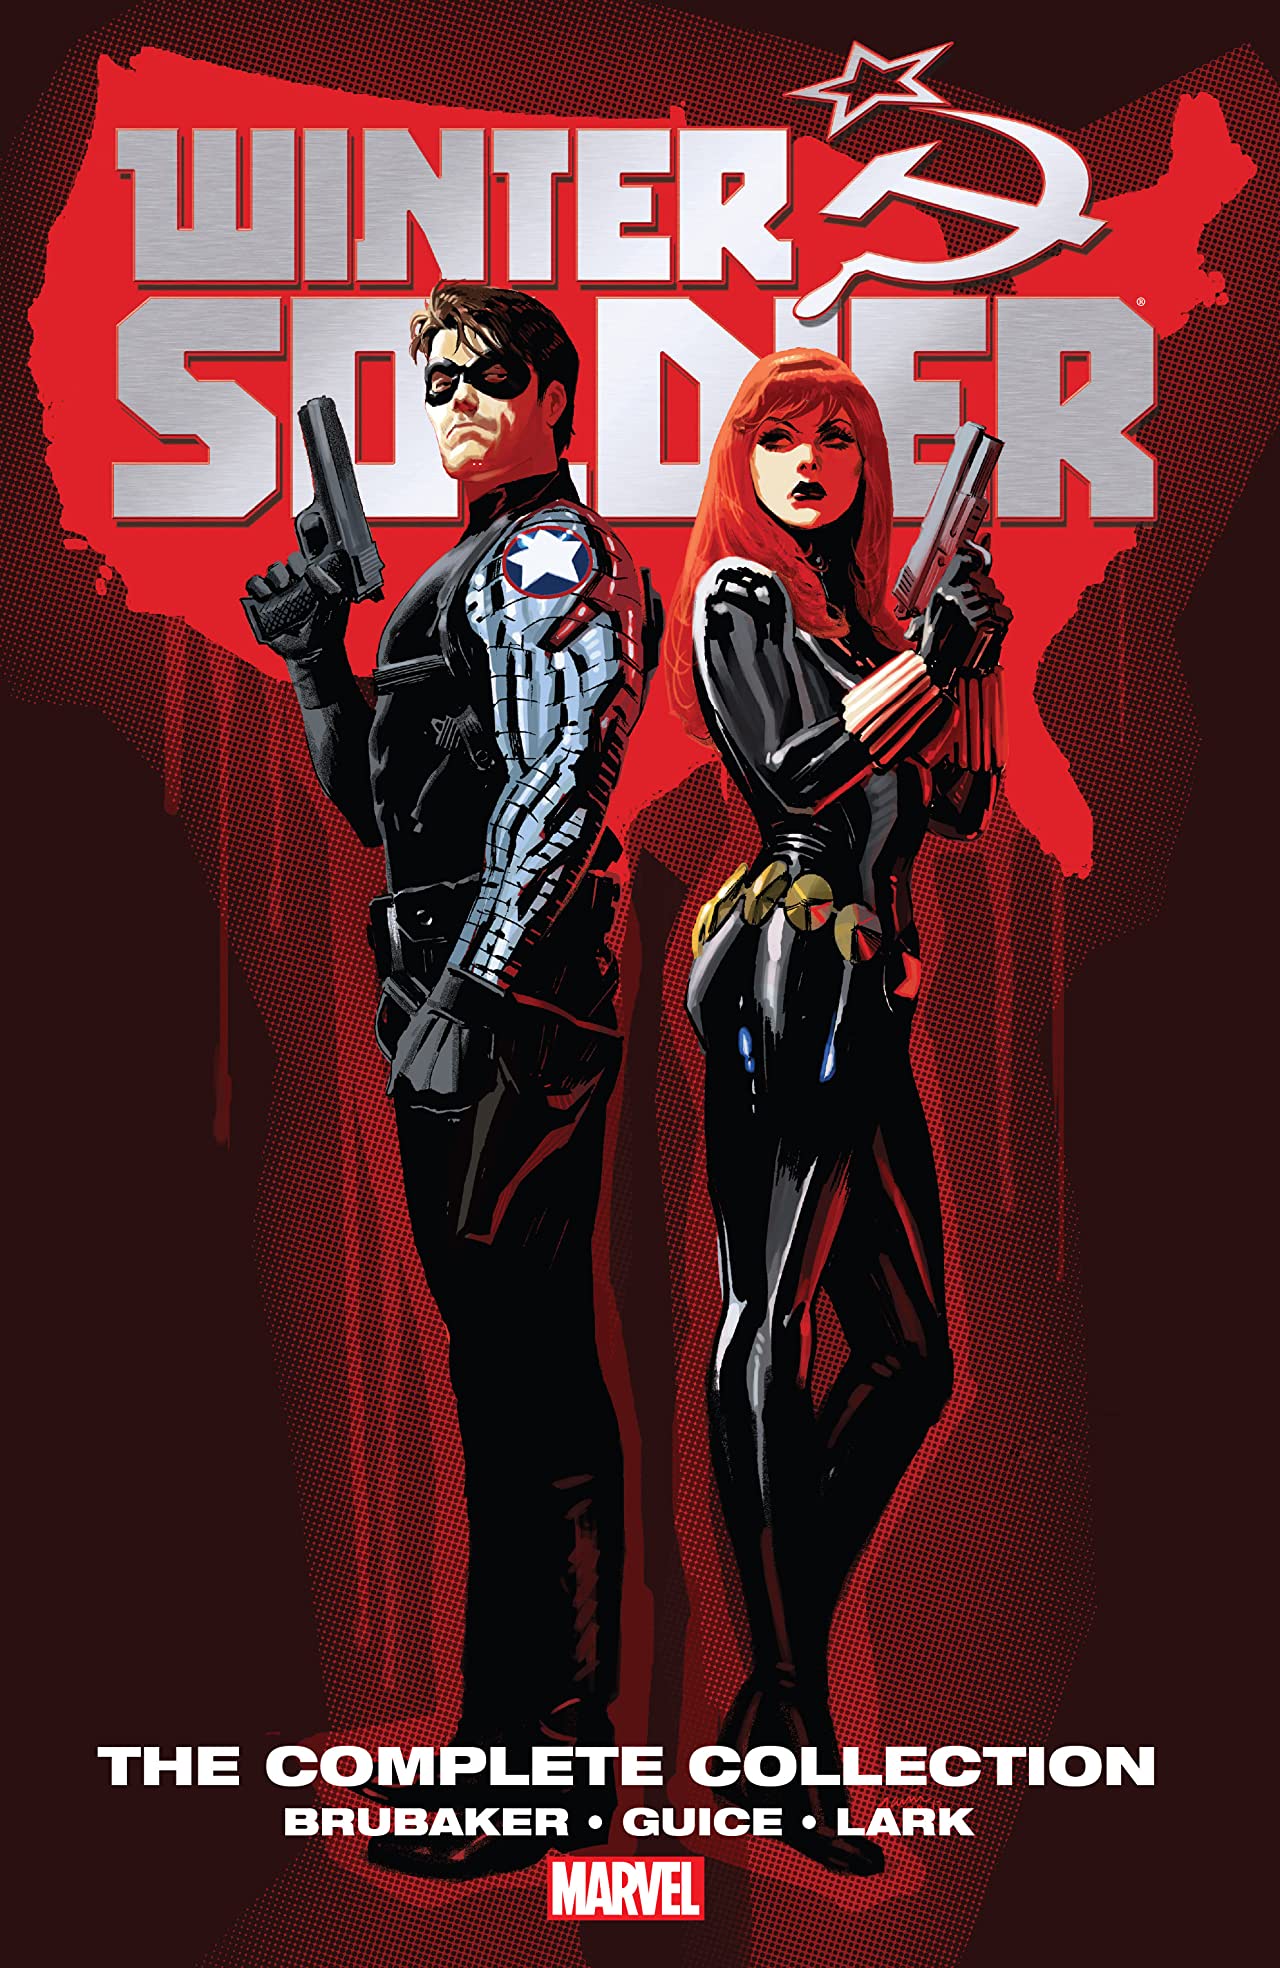 Winter Soldier By Ed Brubaker: The Complete Collection (Trade Paperback)